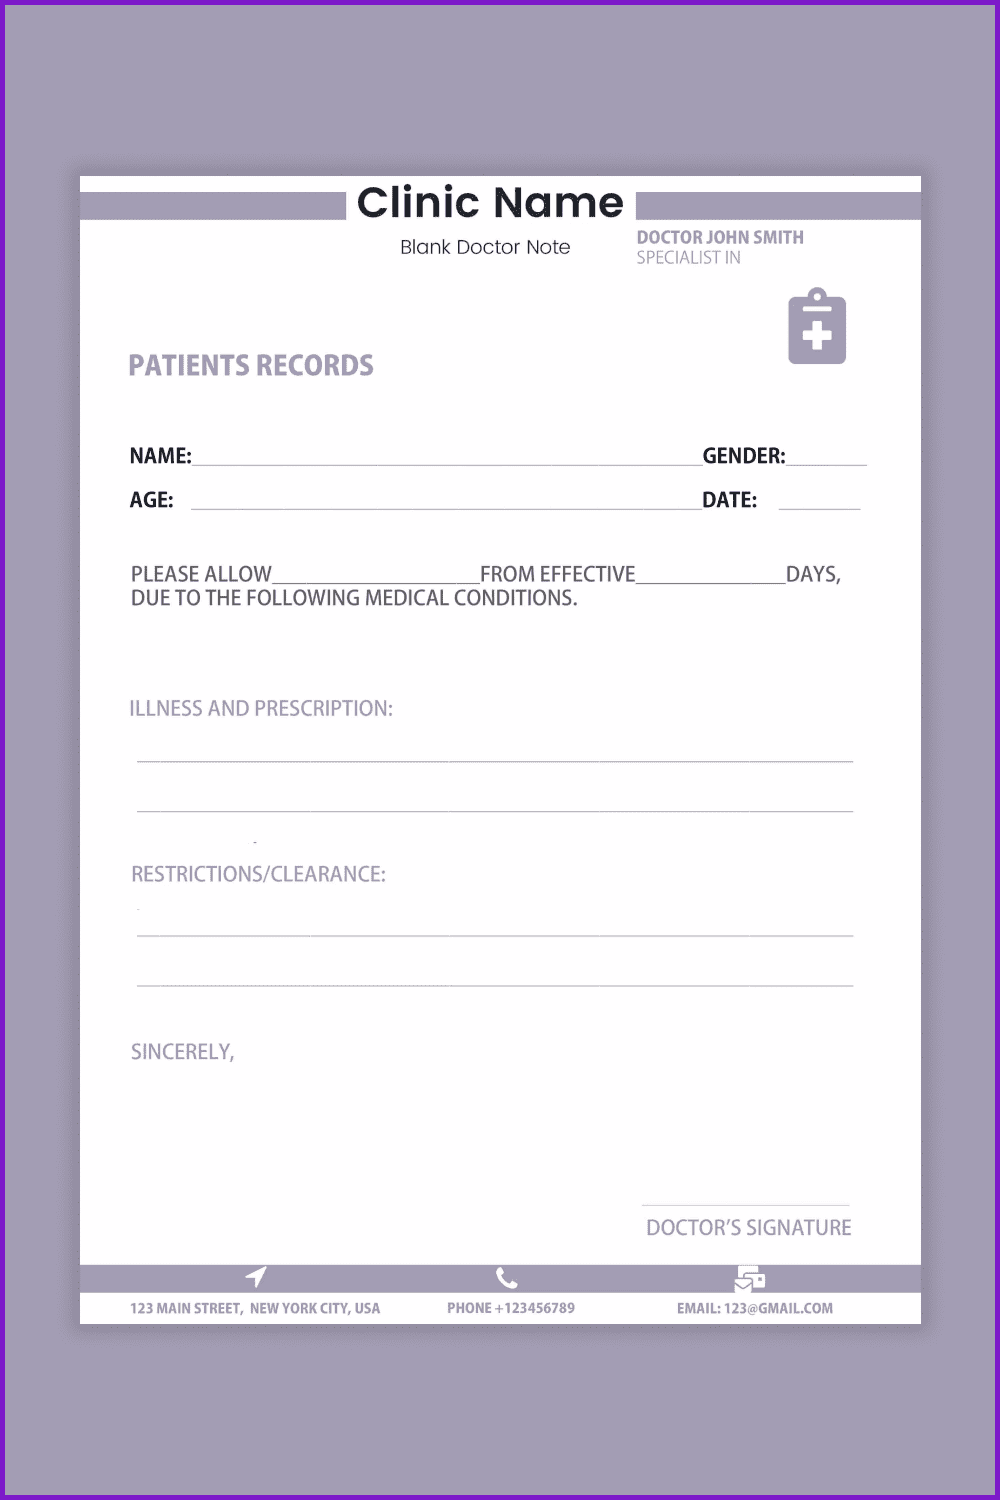 Download Free Doctor Note Template.